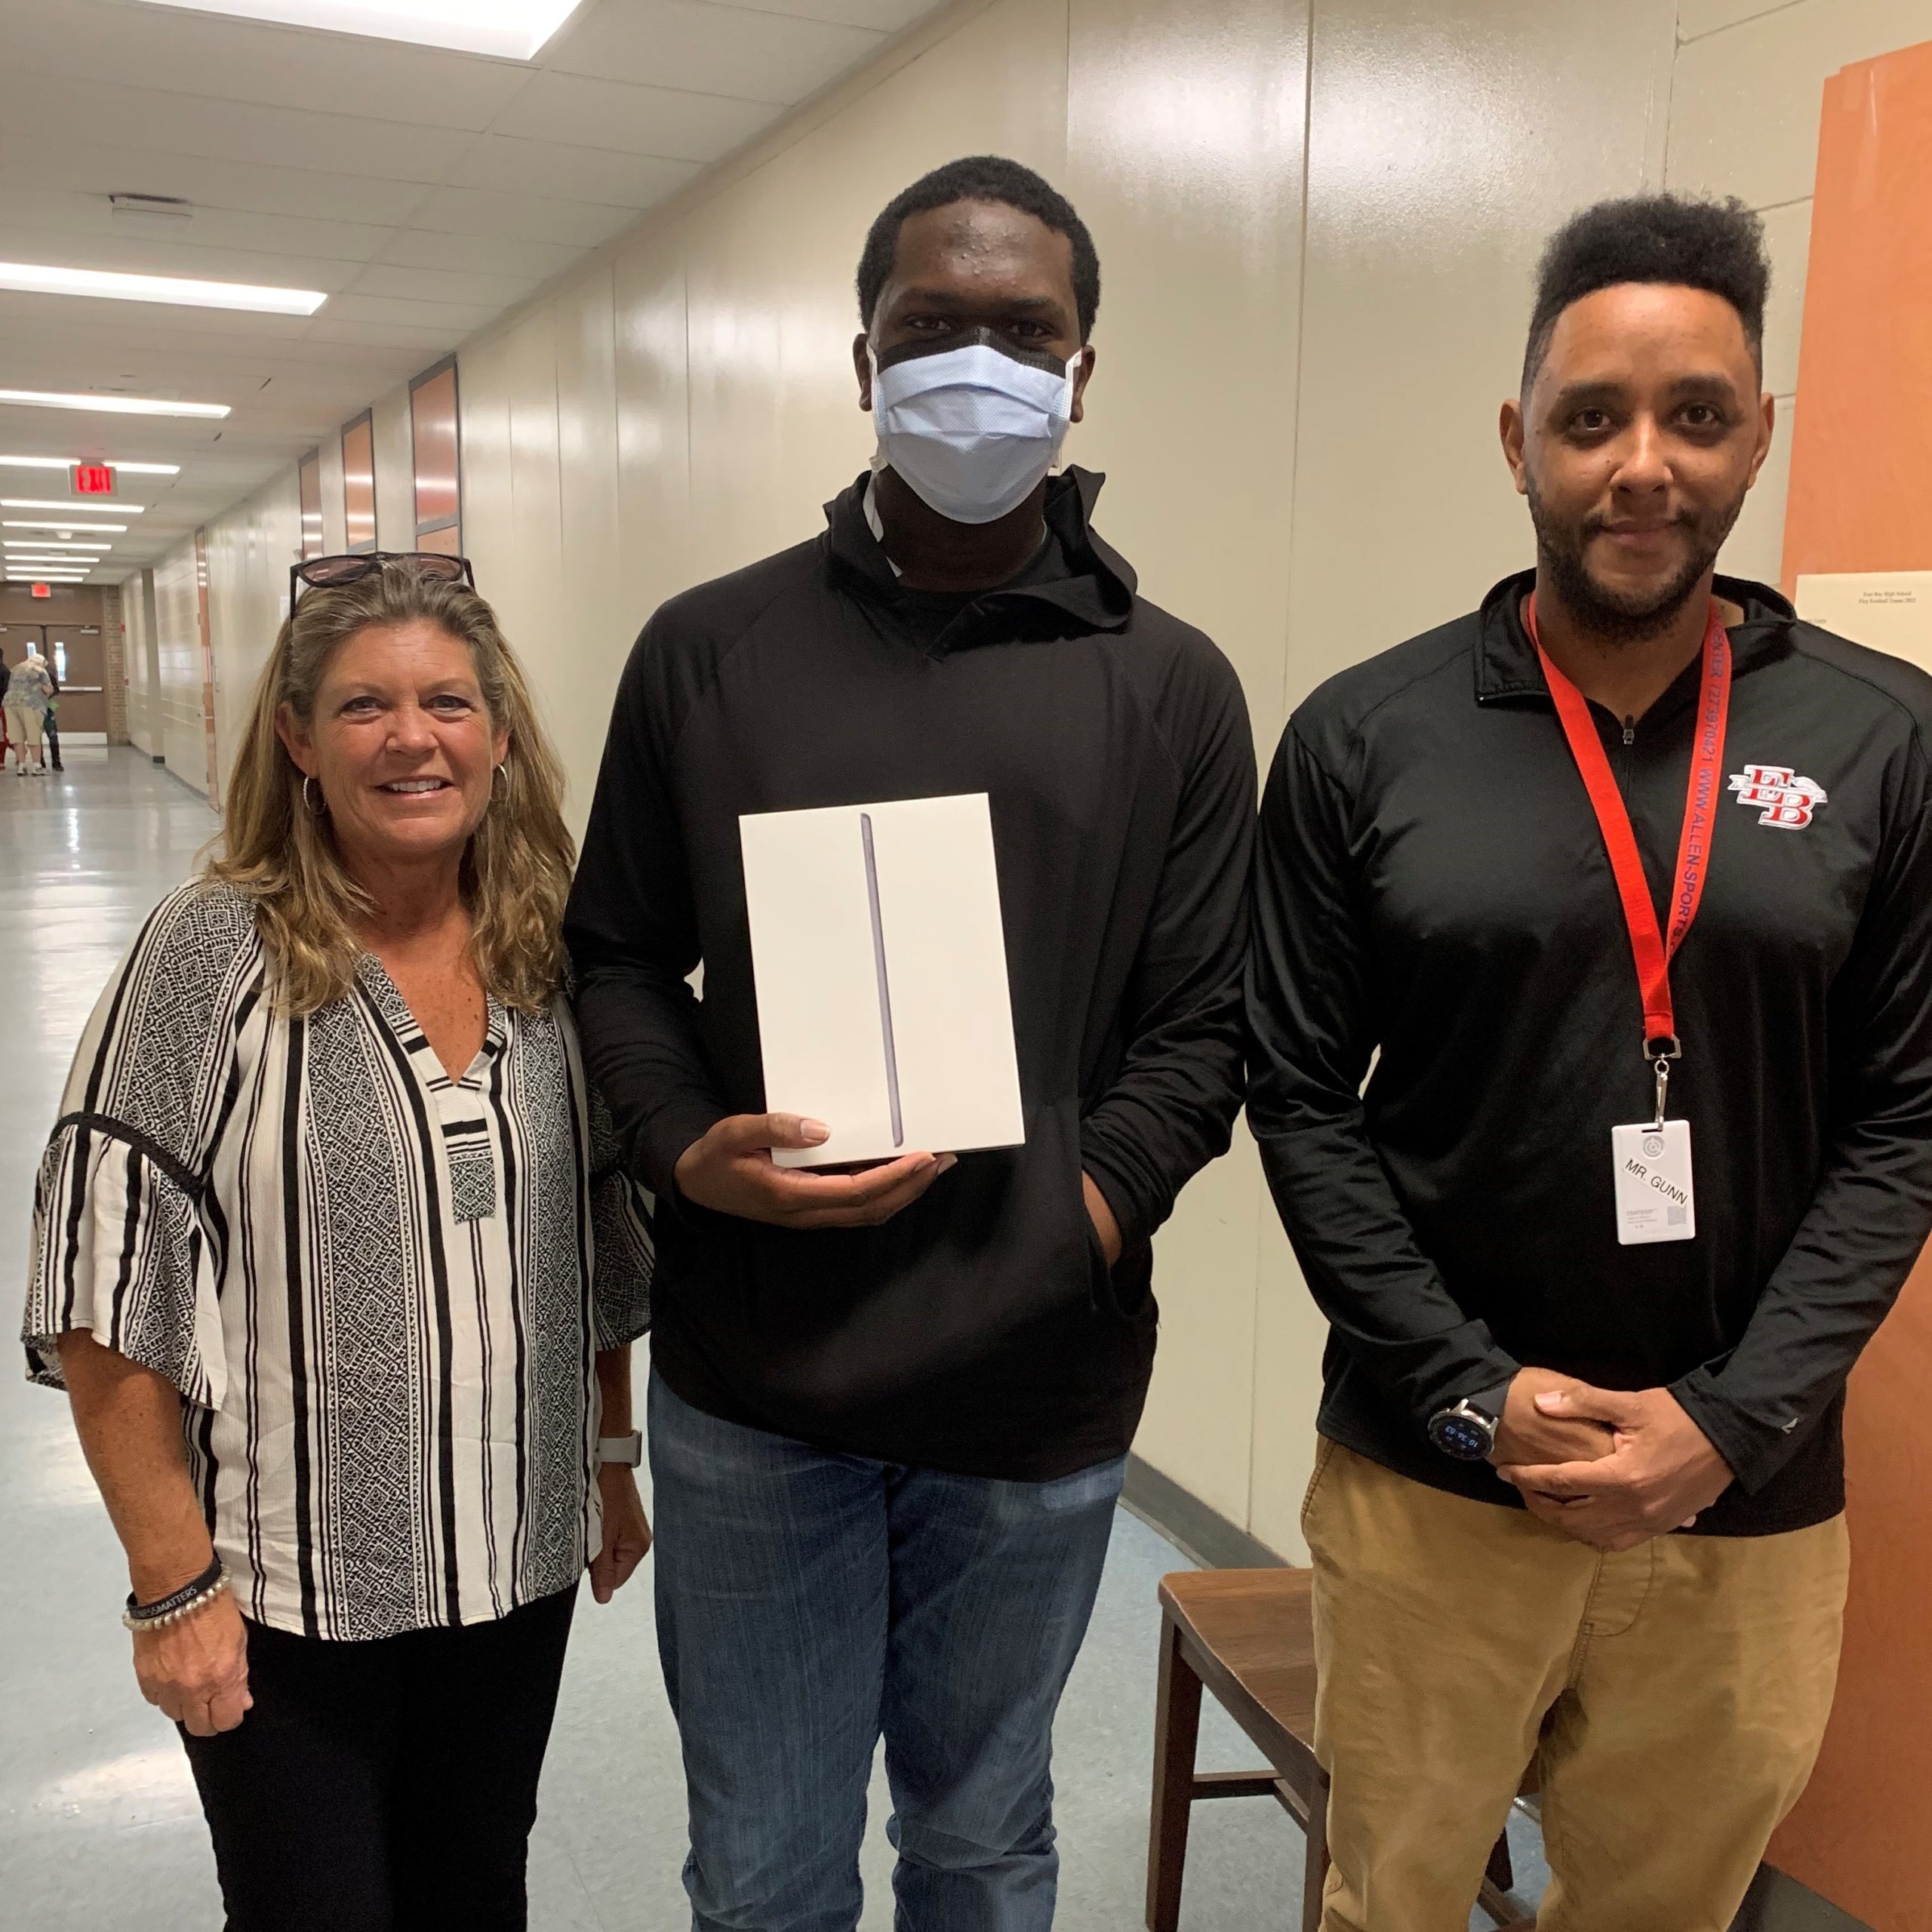 East Bay High School Students Receive New iPads From Waterset By